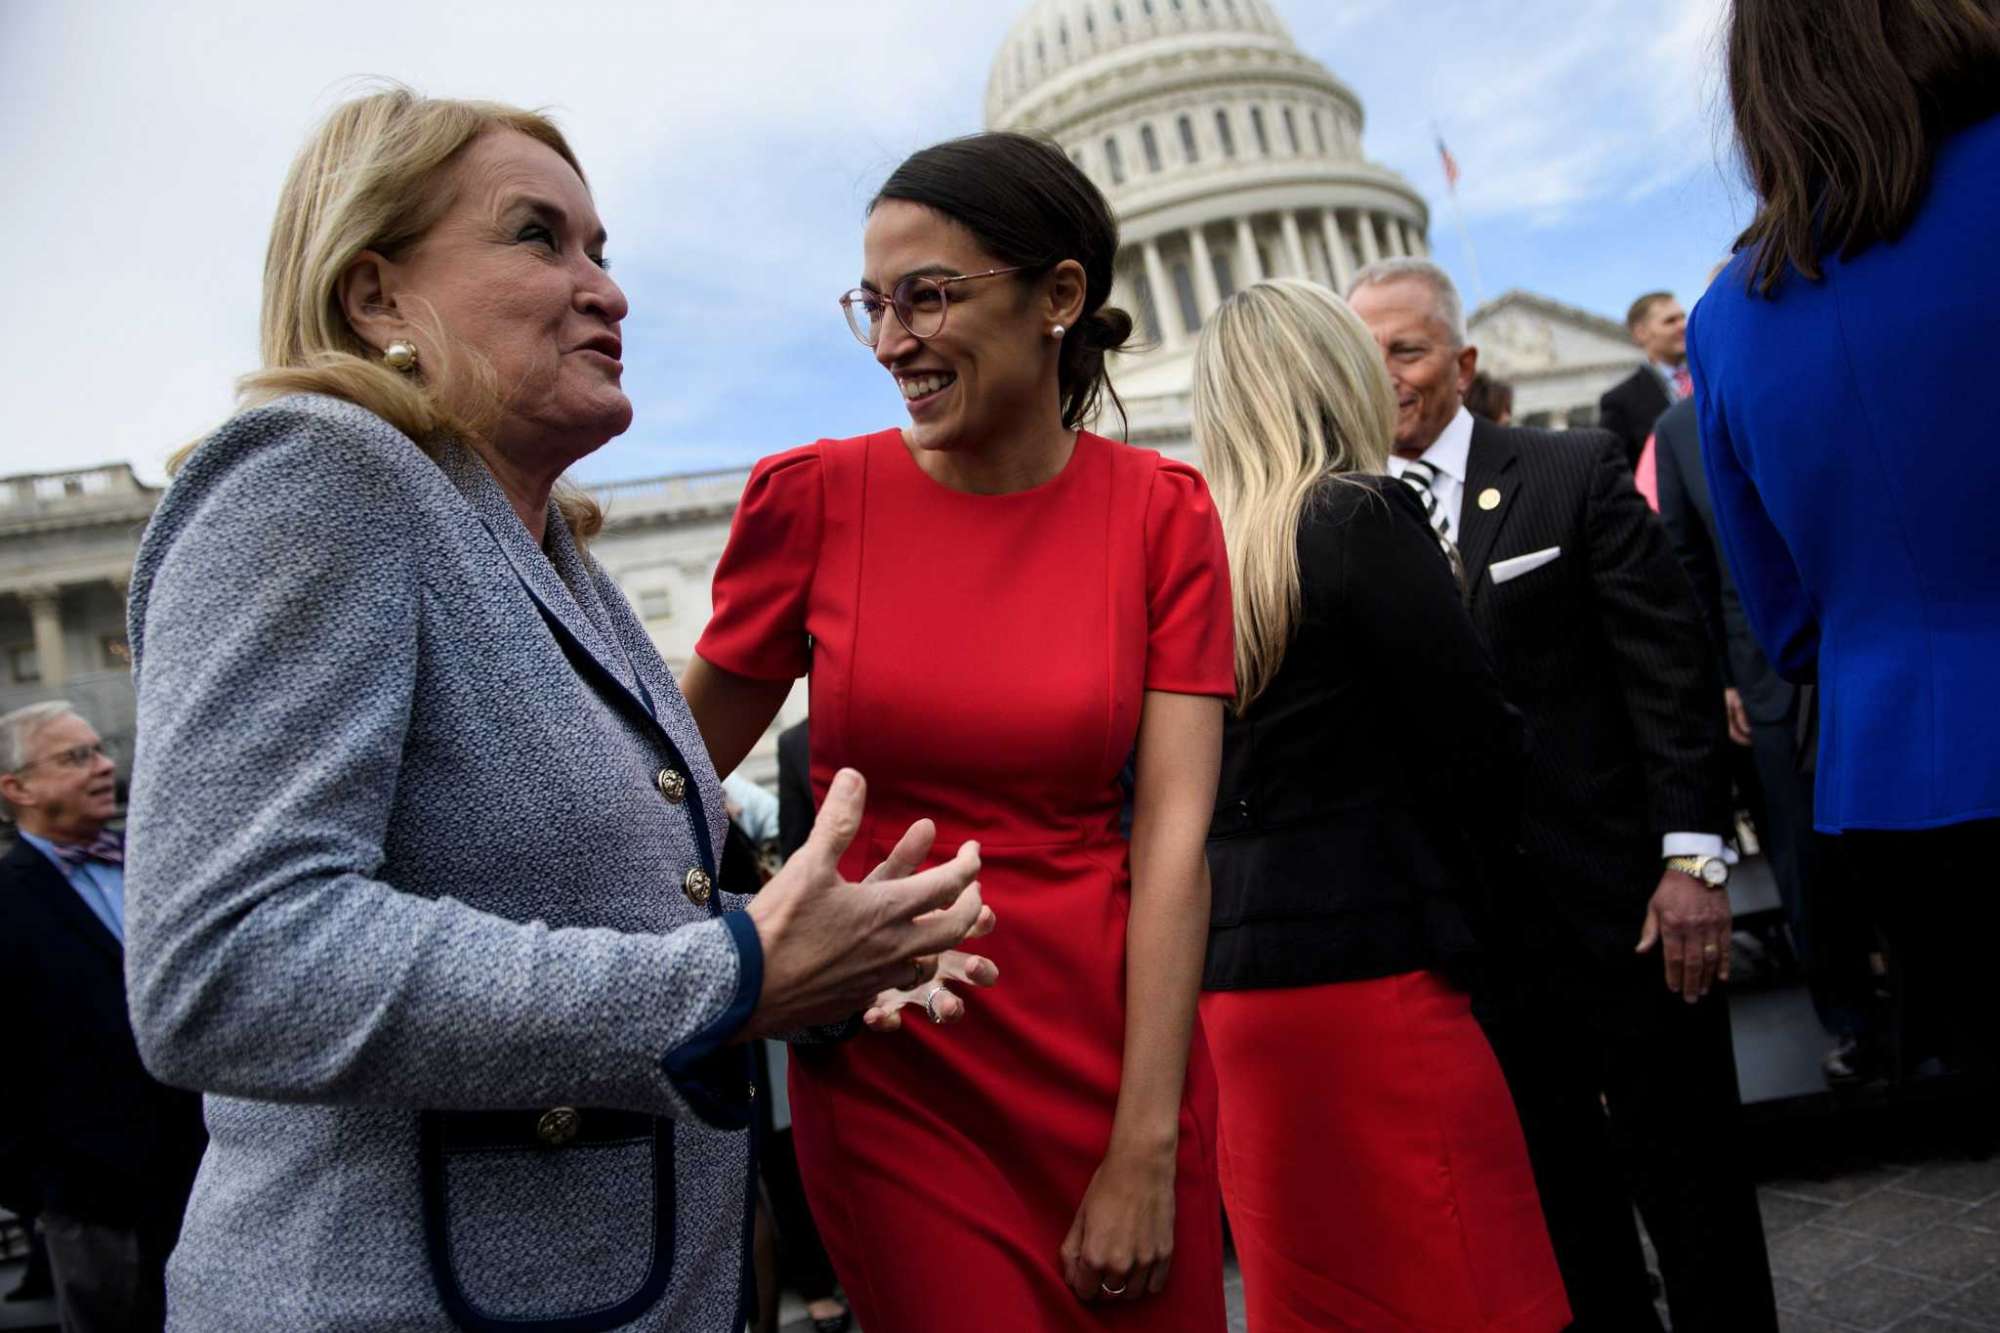 “Lets see how far we can go.” Rep. Alexandria Ocasio Cortez has raised $2 million in less than a day for the Texas storm crisis. Photo:BRENDAN SMIALOWSKI, Contributor / AFP/Getty Images
